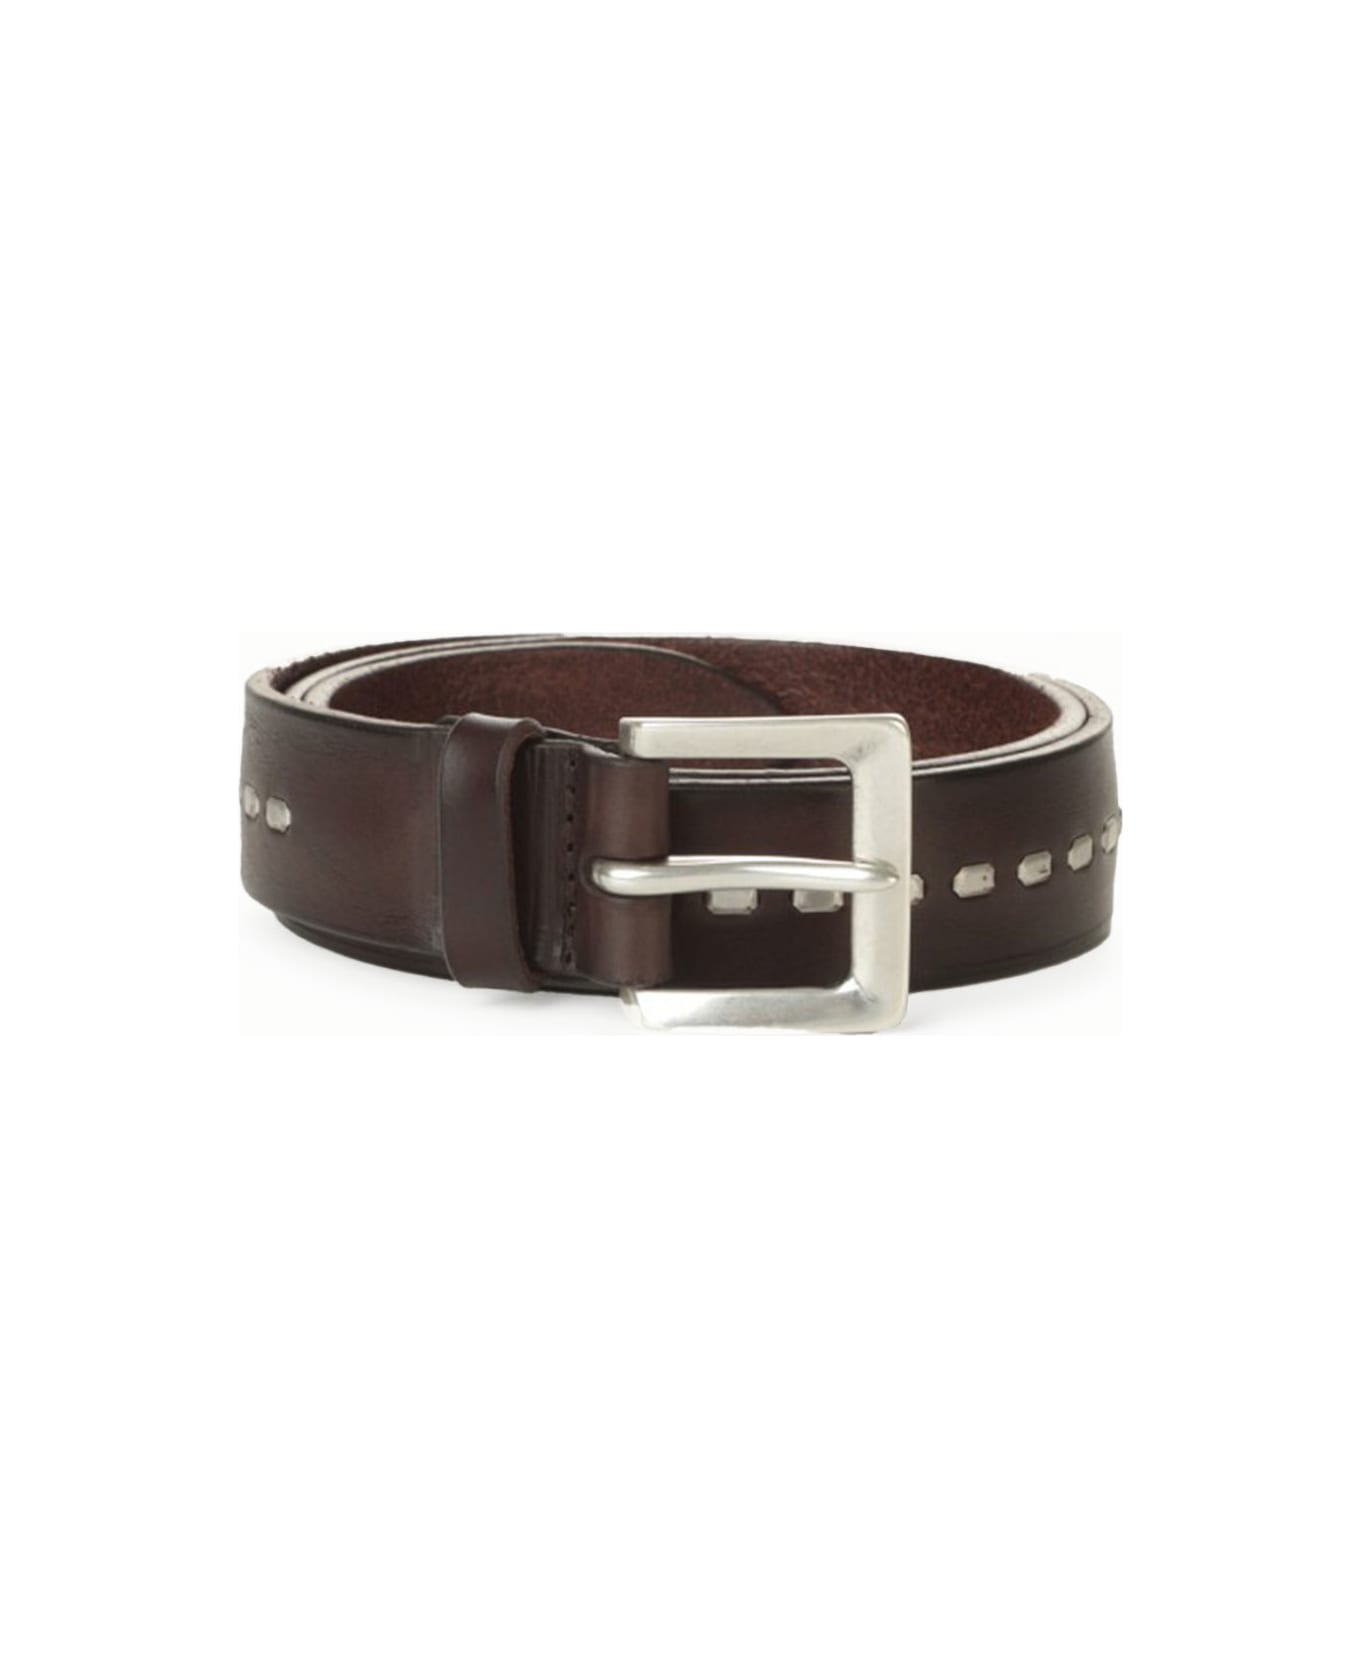 Orciani Dark Brown Leather Belt - T.MORO